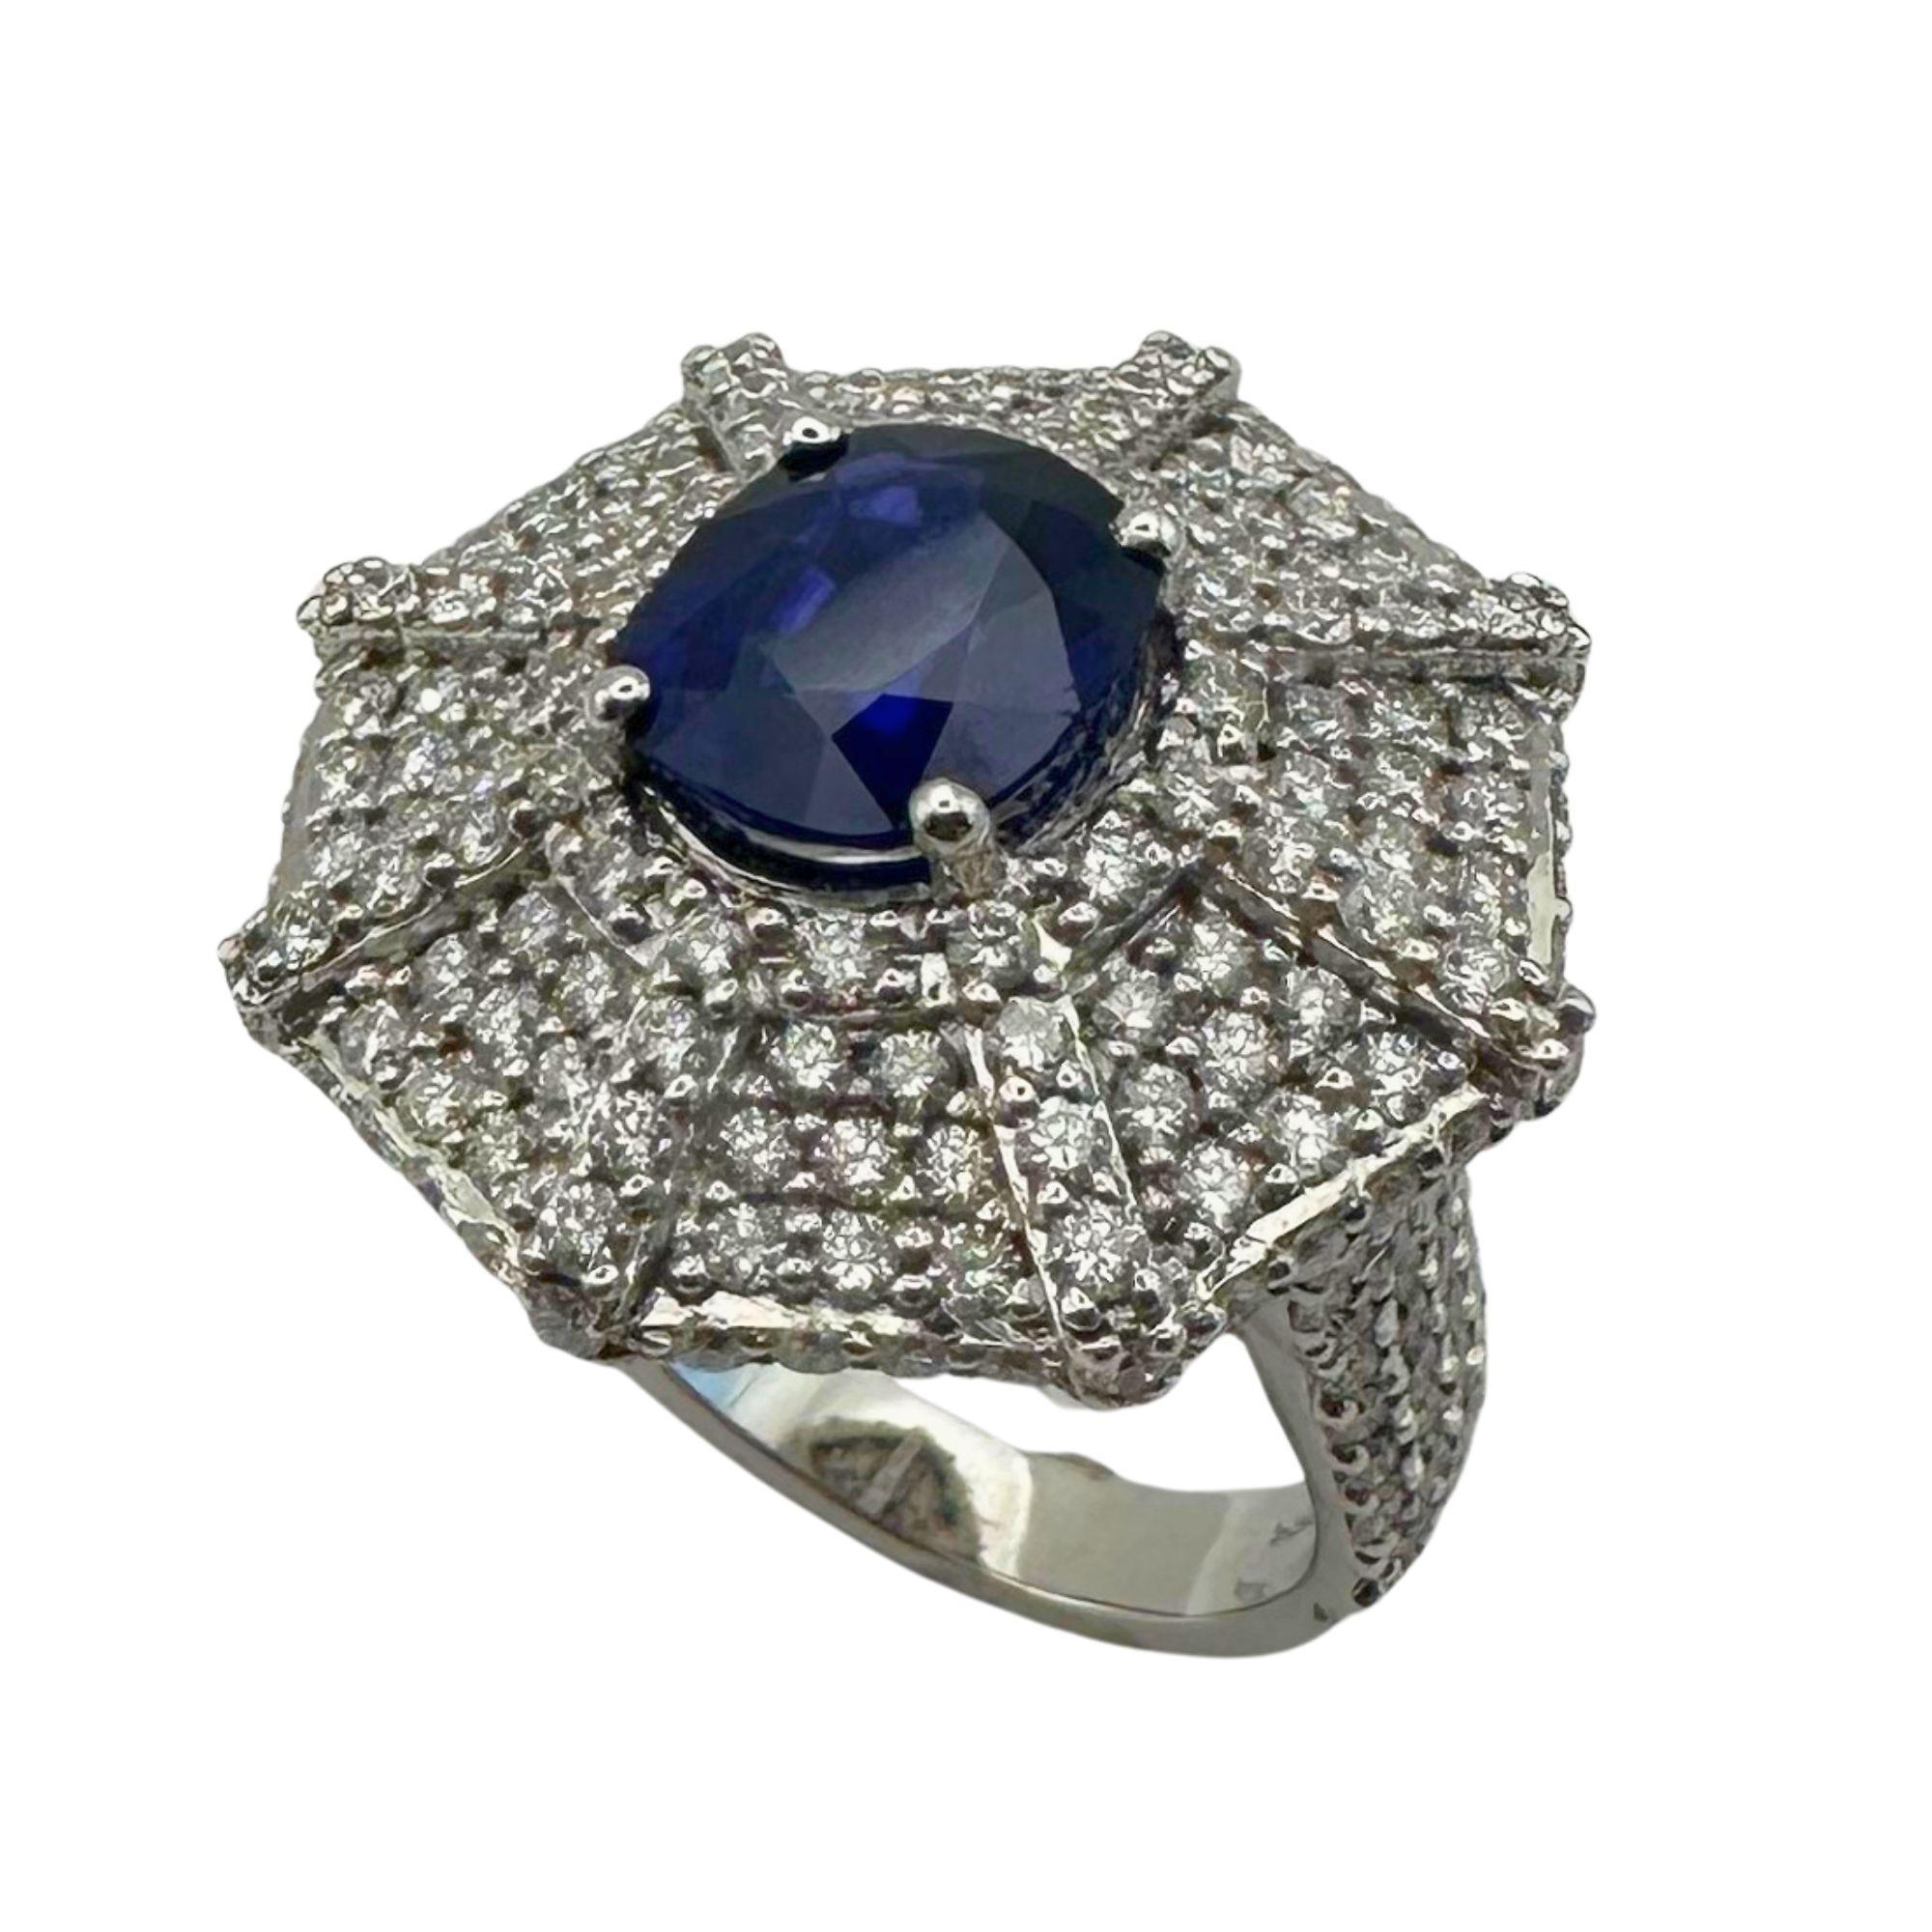 This 18k diamond and sapphire ring is a stunning piece of jewelry. The 3.05 carat sapphire center is surrounded by 3.34 carats of sparkling diamonds, making for a total weight of 10.8 grams. Its size 6.25 ensures a perfect fit. Elevate any outfit